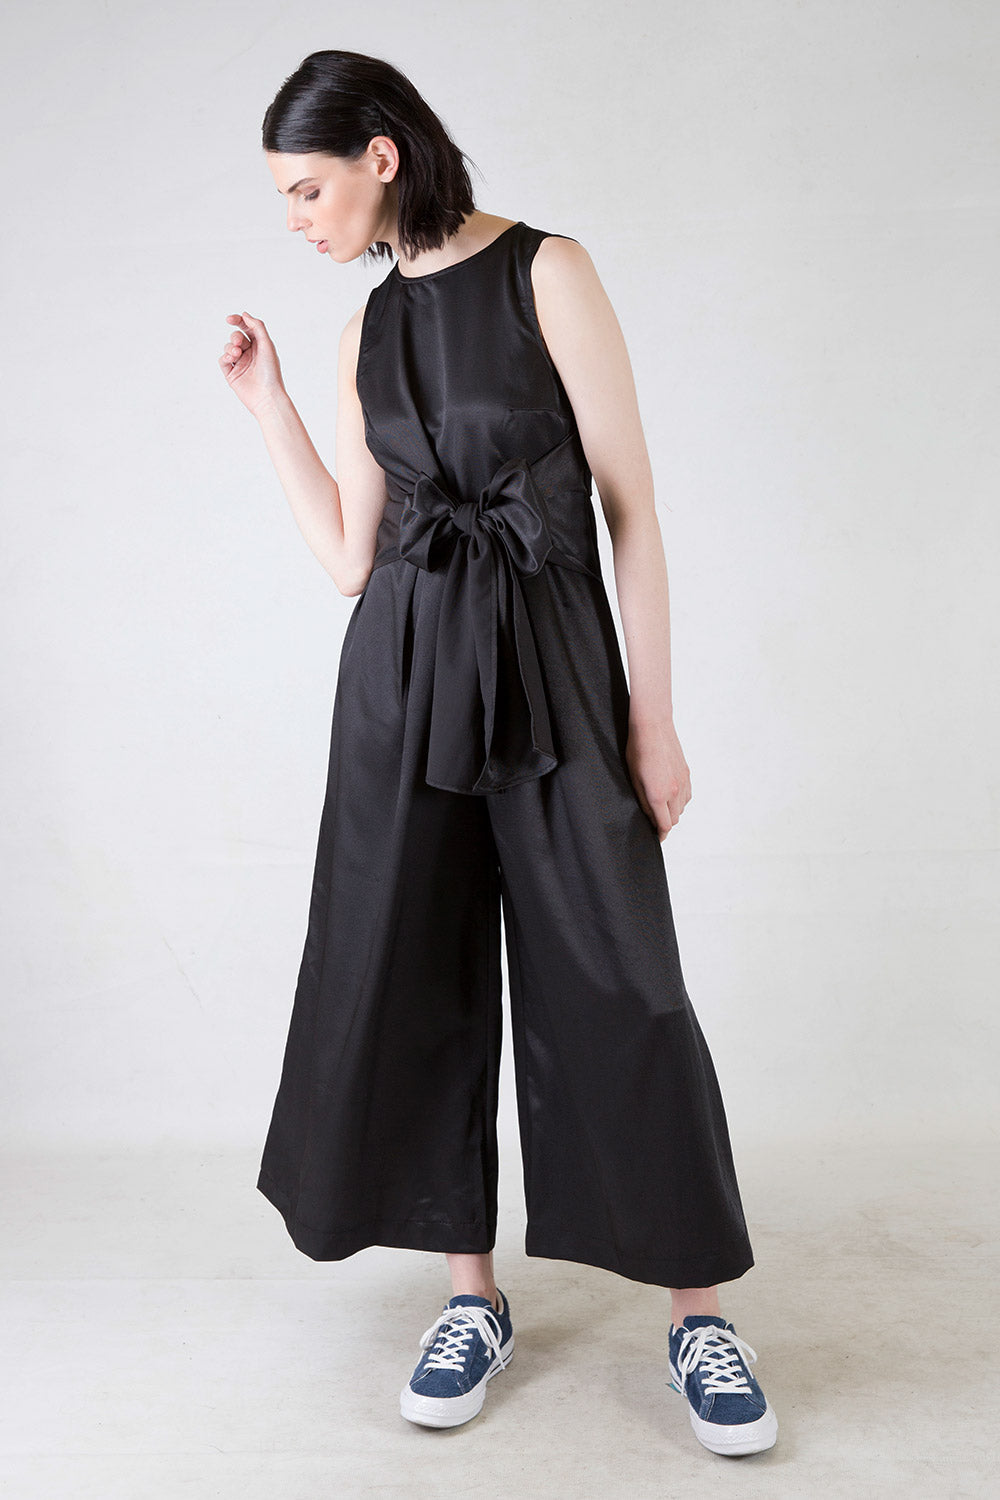 Harry Jumpsuit | Young + Resolute | Annah Stretton